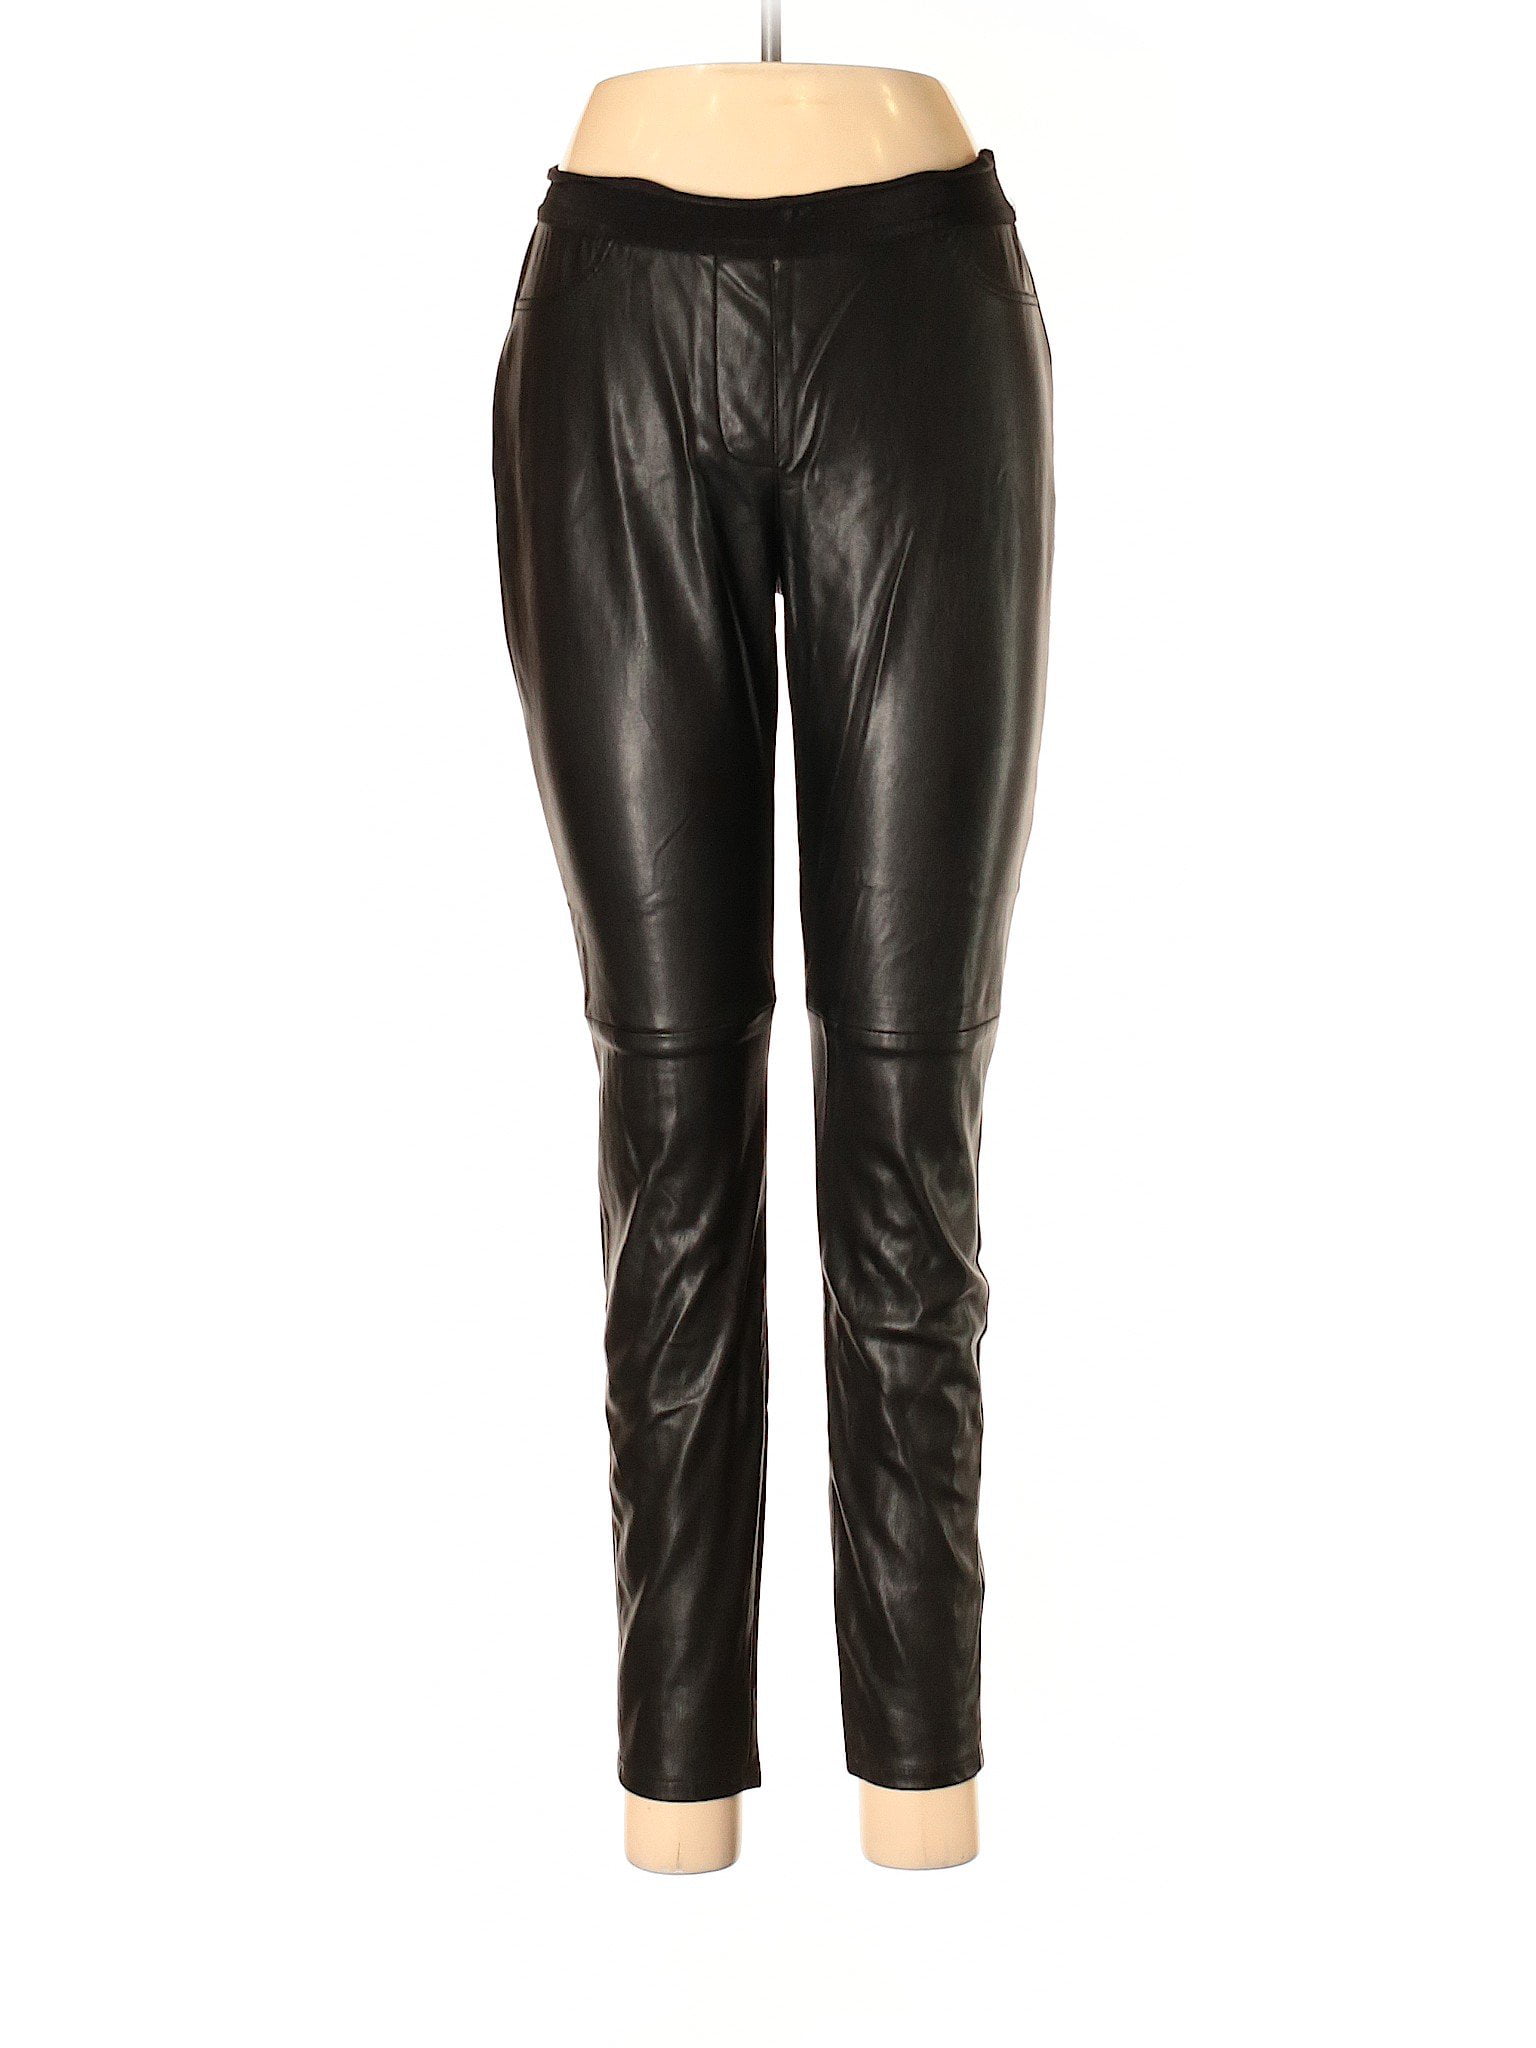 leather pants size 8